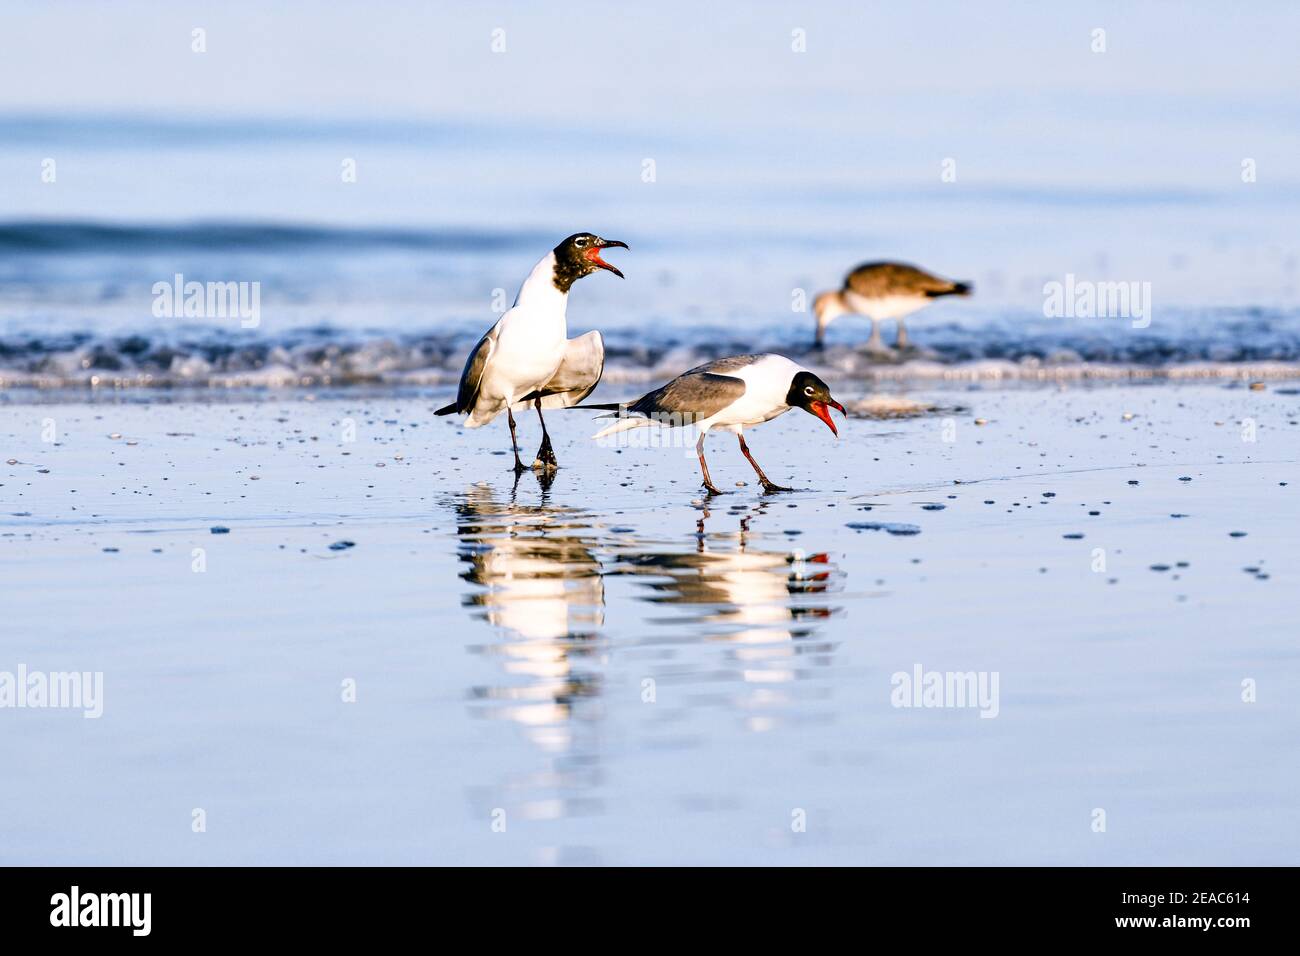 Screeching seagulls with beak open in the morning surf on the Gulf Coast, close-up Stock Photo